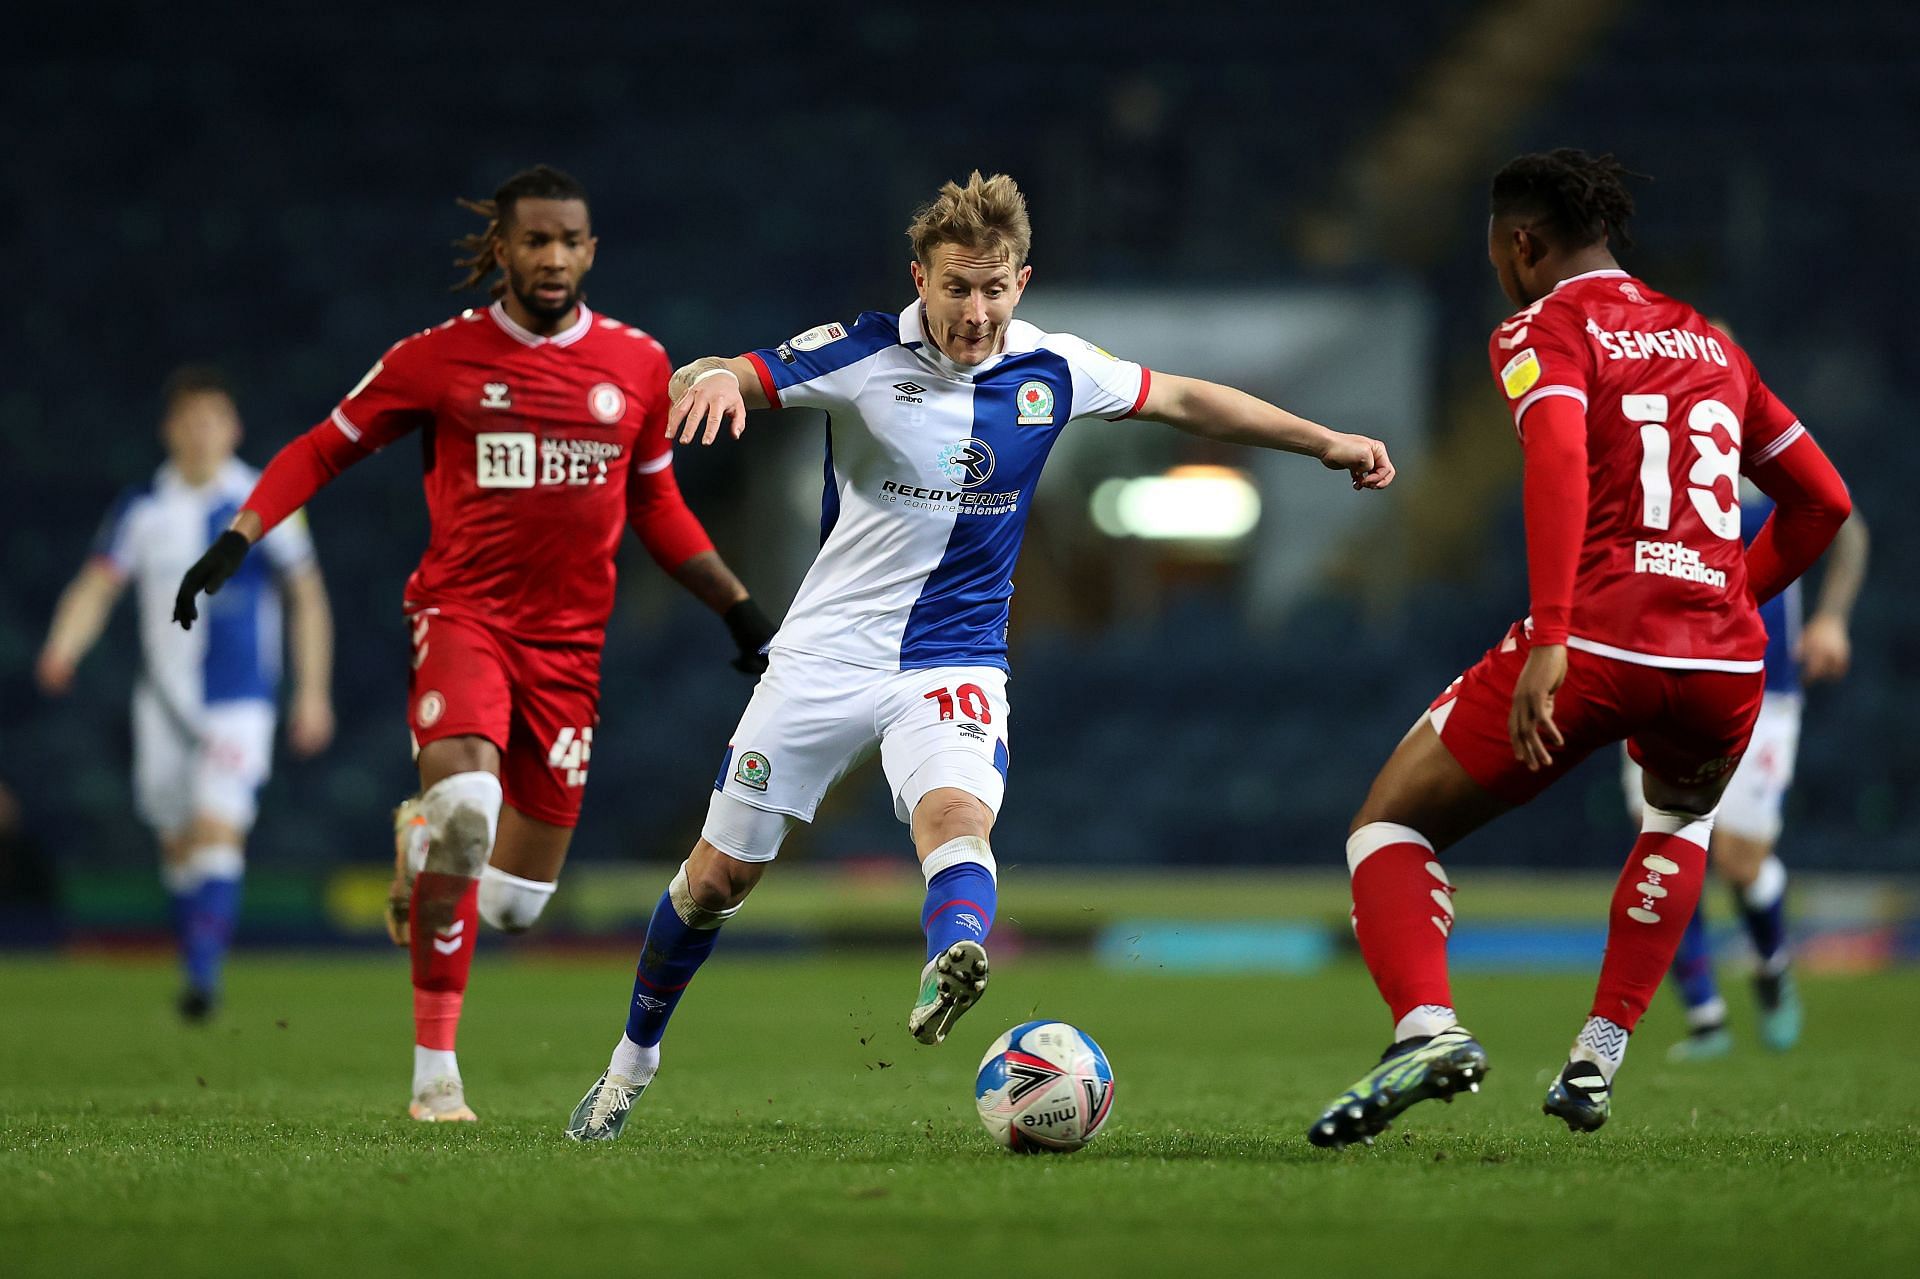 Blackburn and Bristol have shared the spoils in their last two encounters